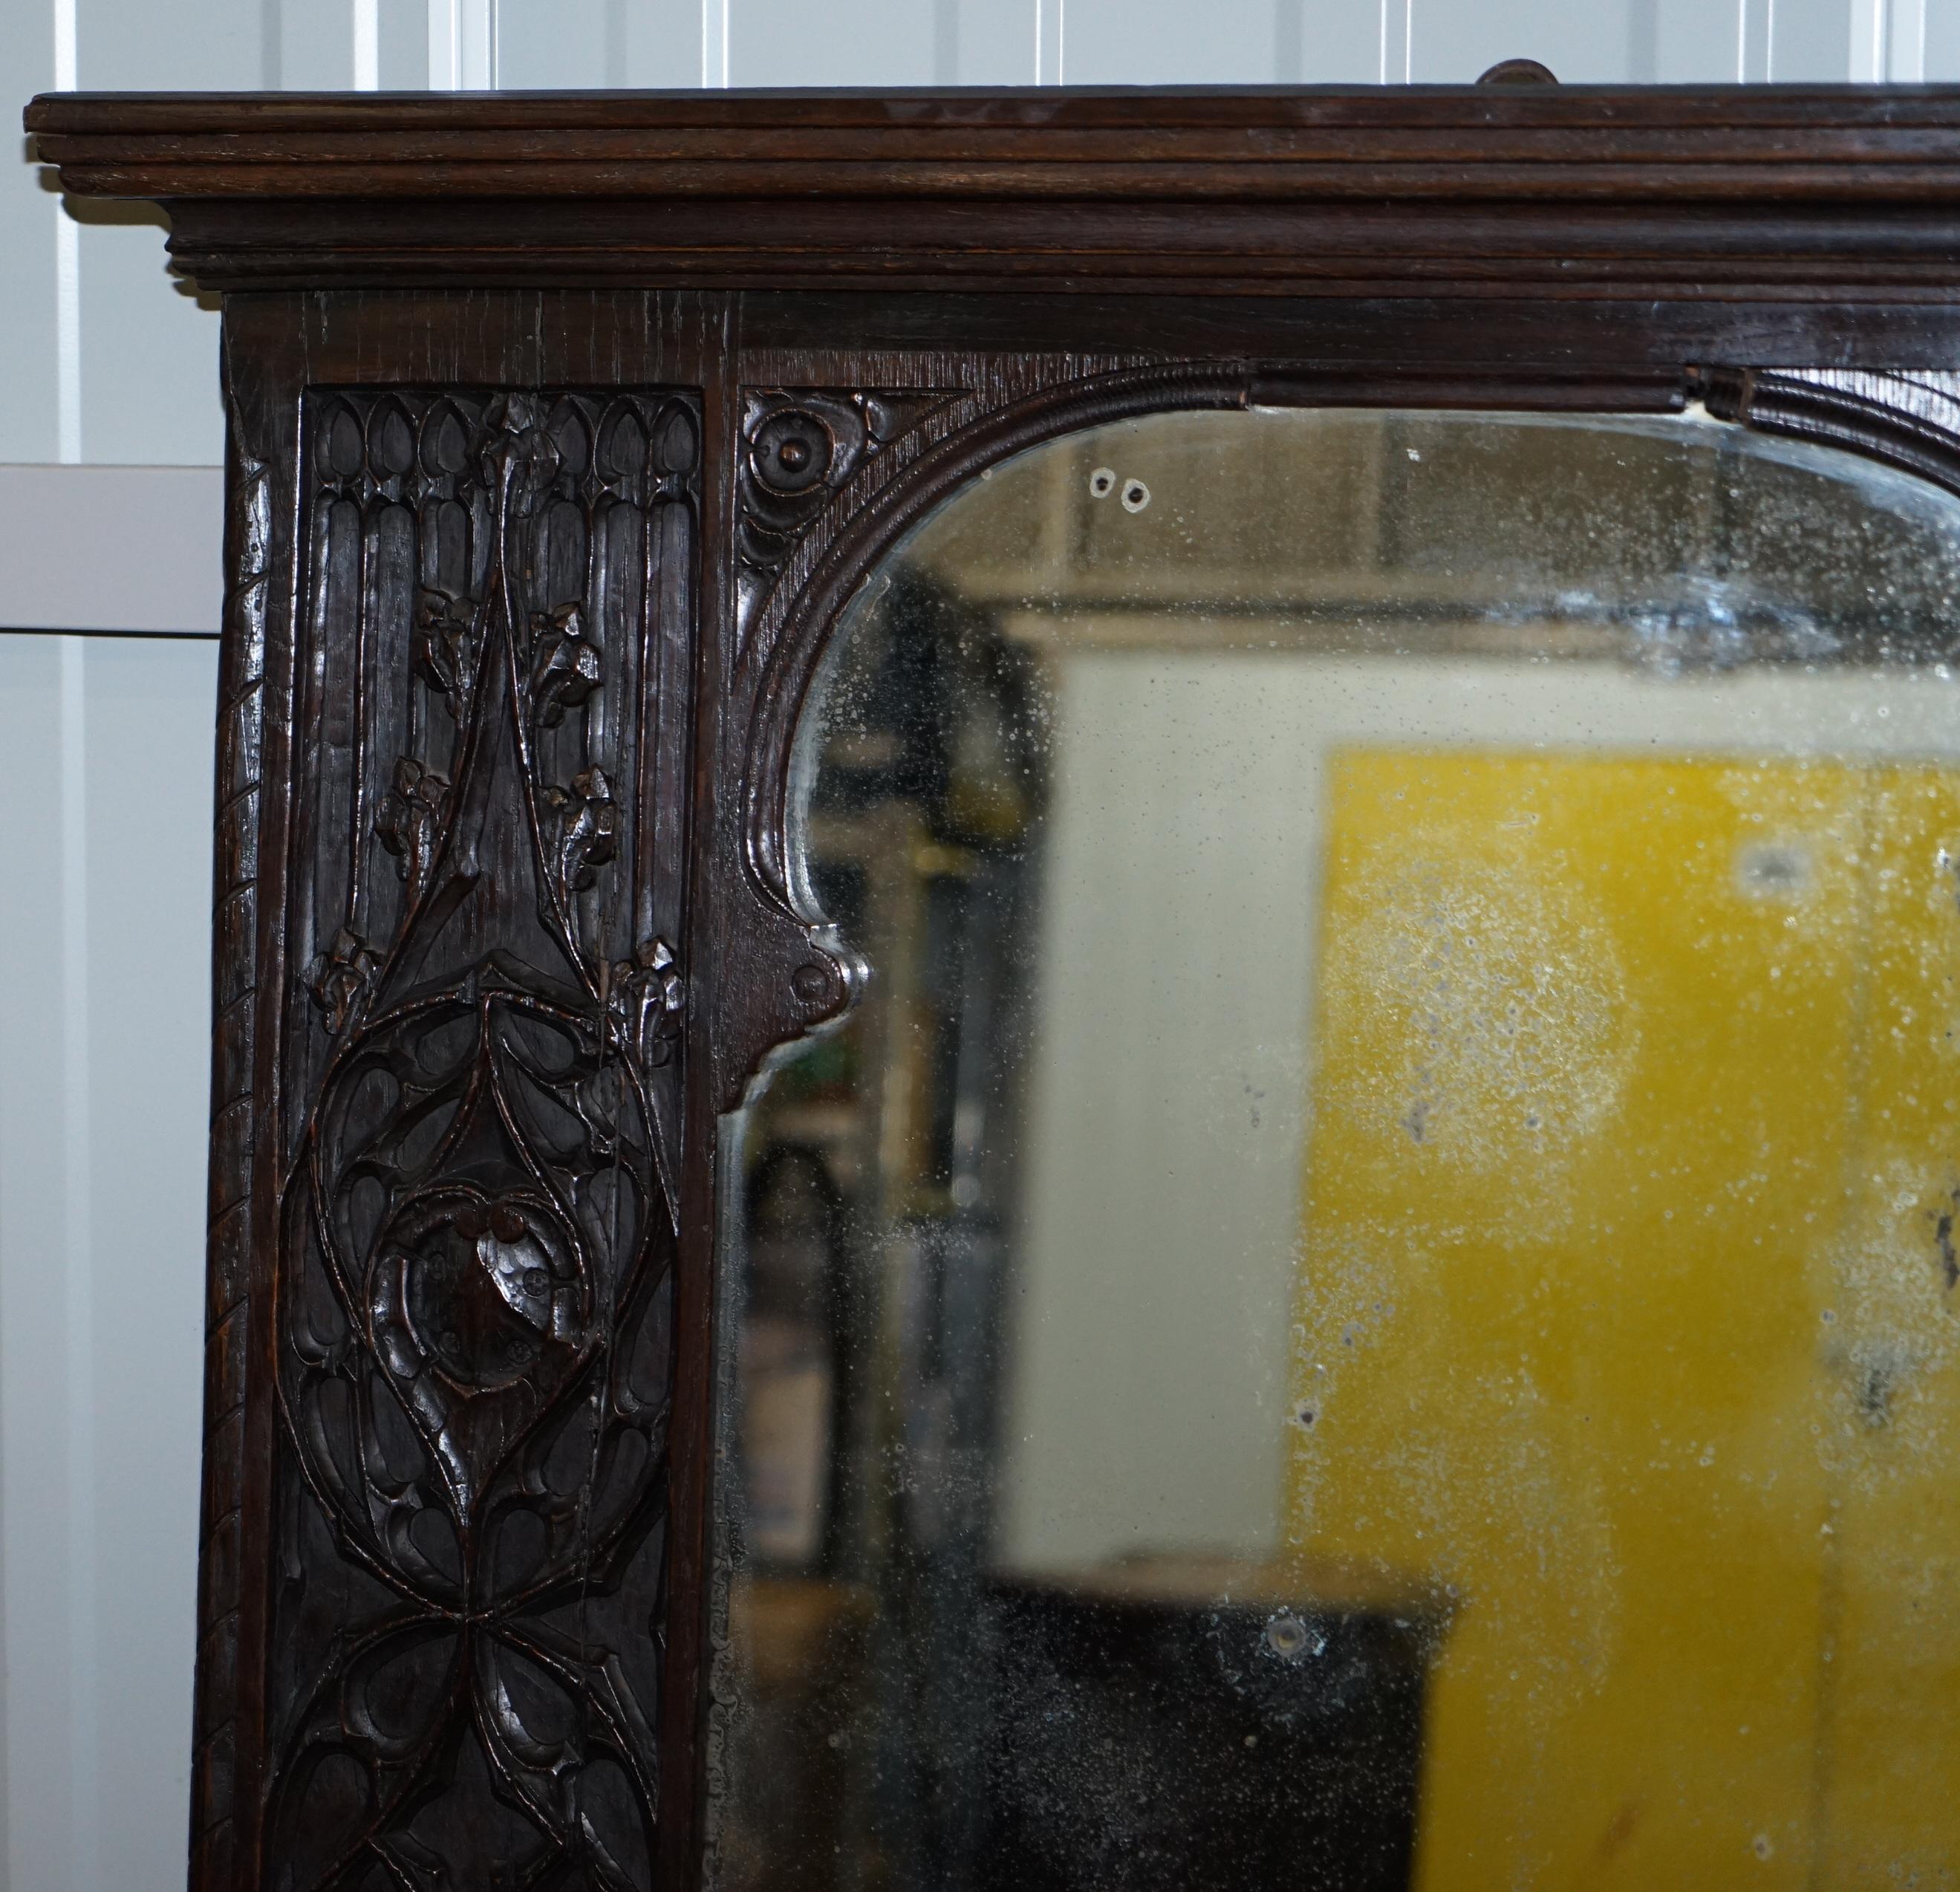 We are delighted to offer for sale this stunning and very rare original 16th century hand carved English wood mirror with Gothic tracery decoration

A very rare find, this mirror is designed to be wall mounted, I’m not sure of the exact history as